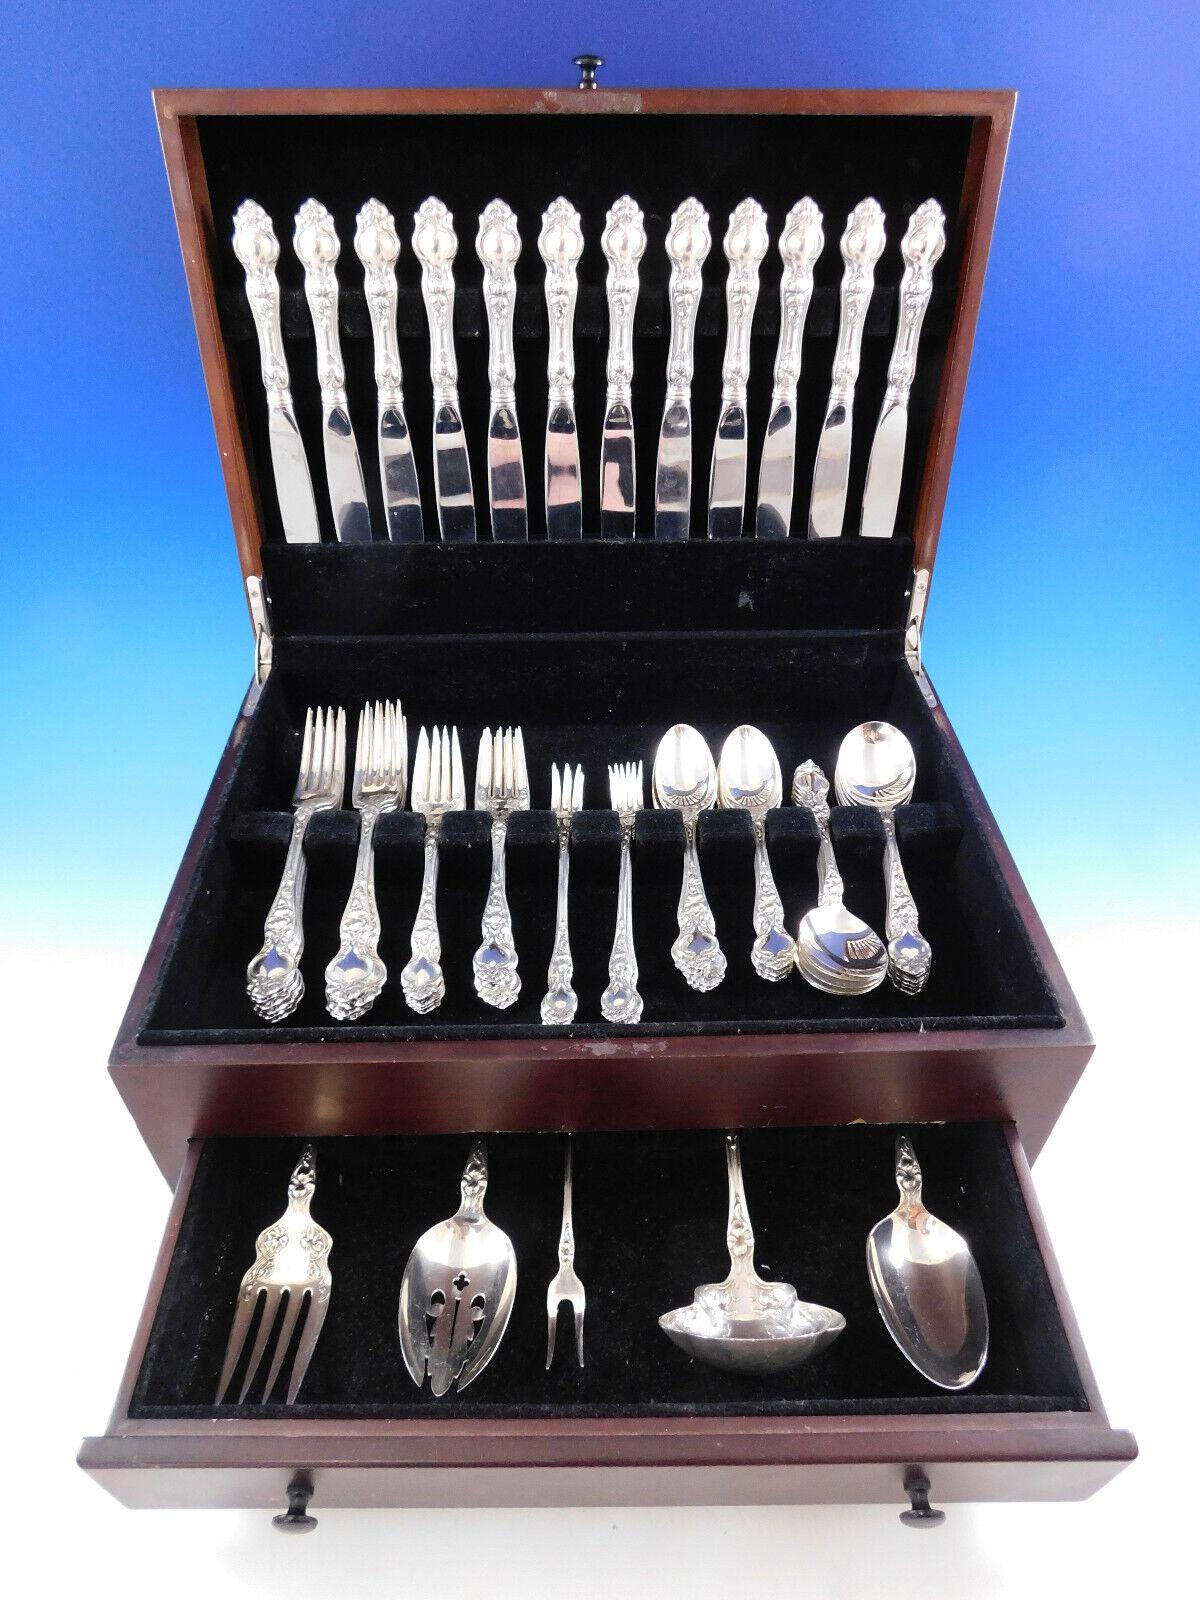 Violet by Wallace sterling silver Flatware set - 77 pieces. This set includes:

12 Knives, 8 3/4